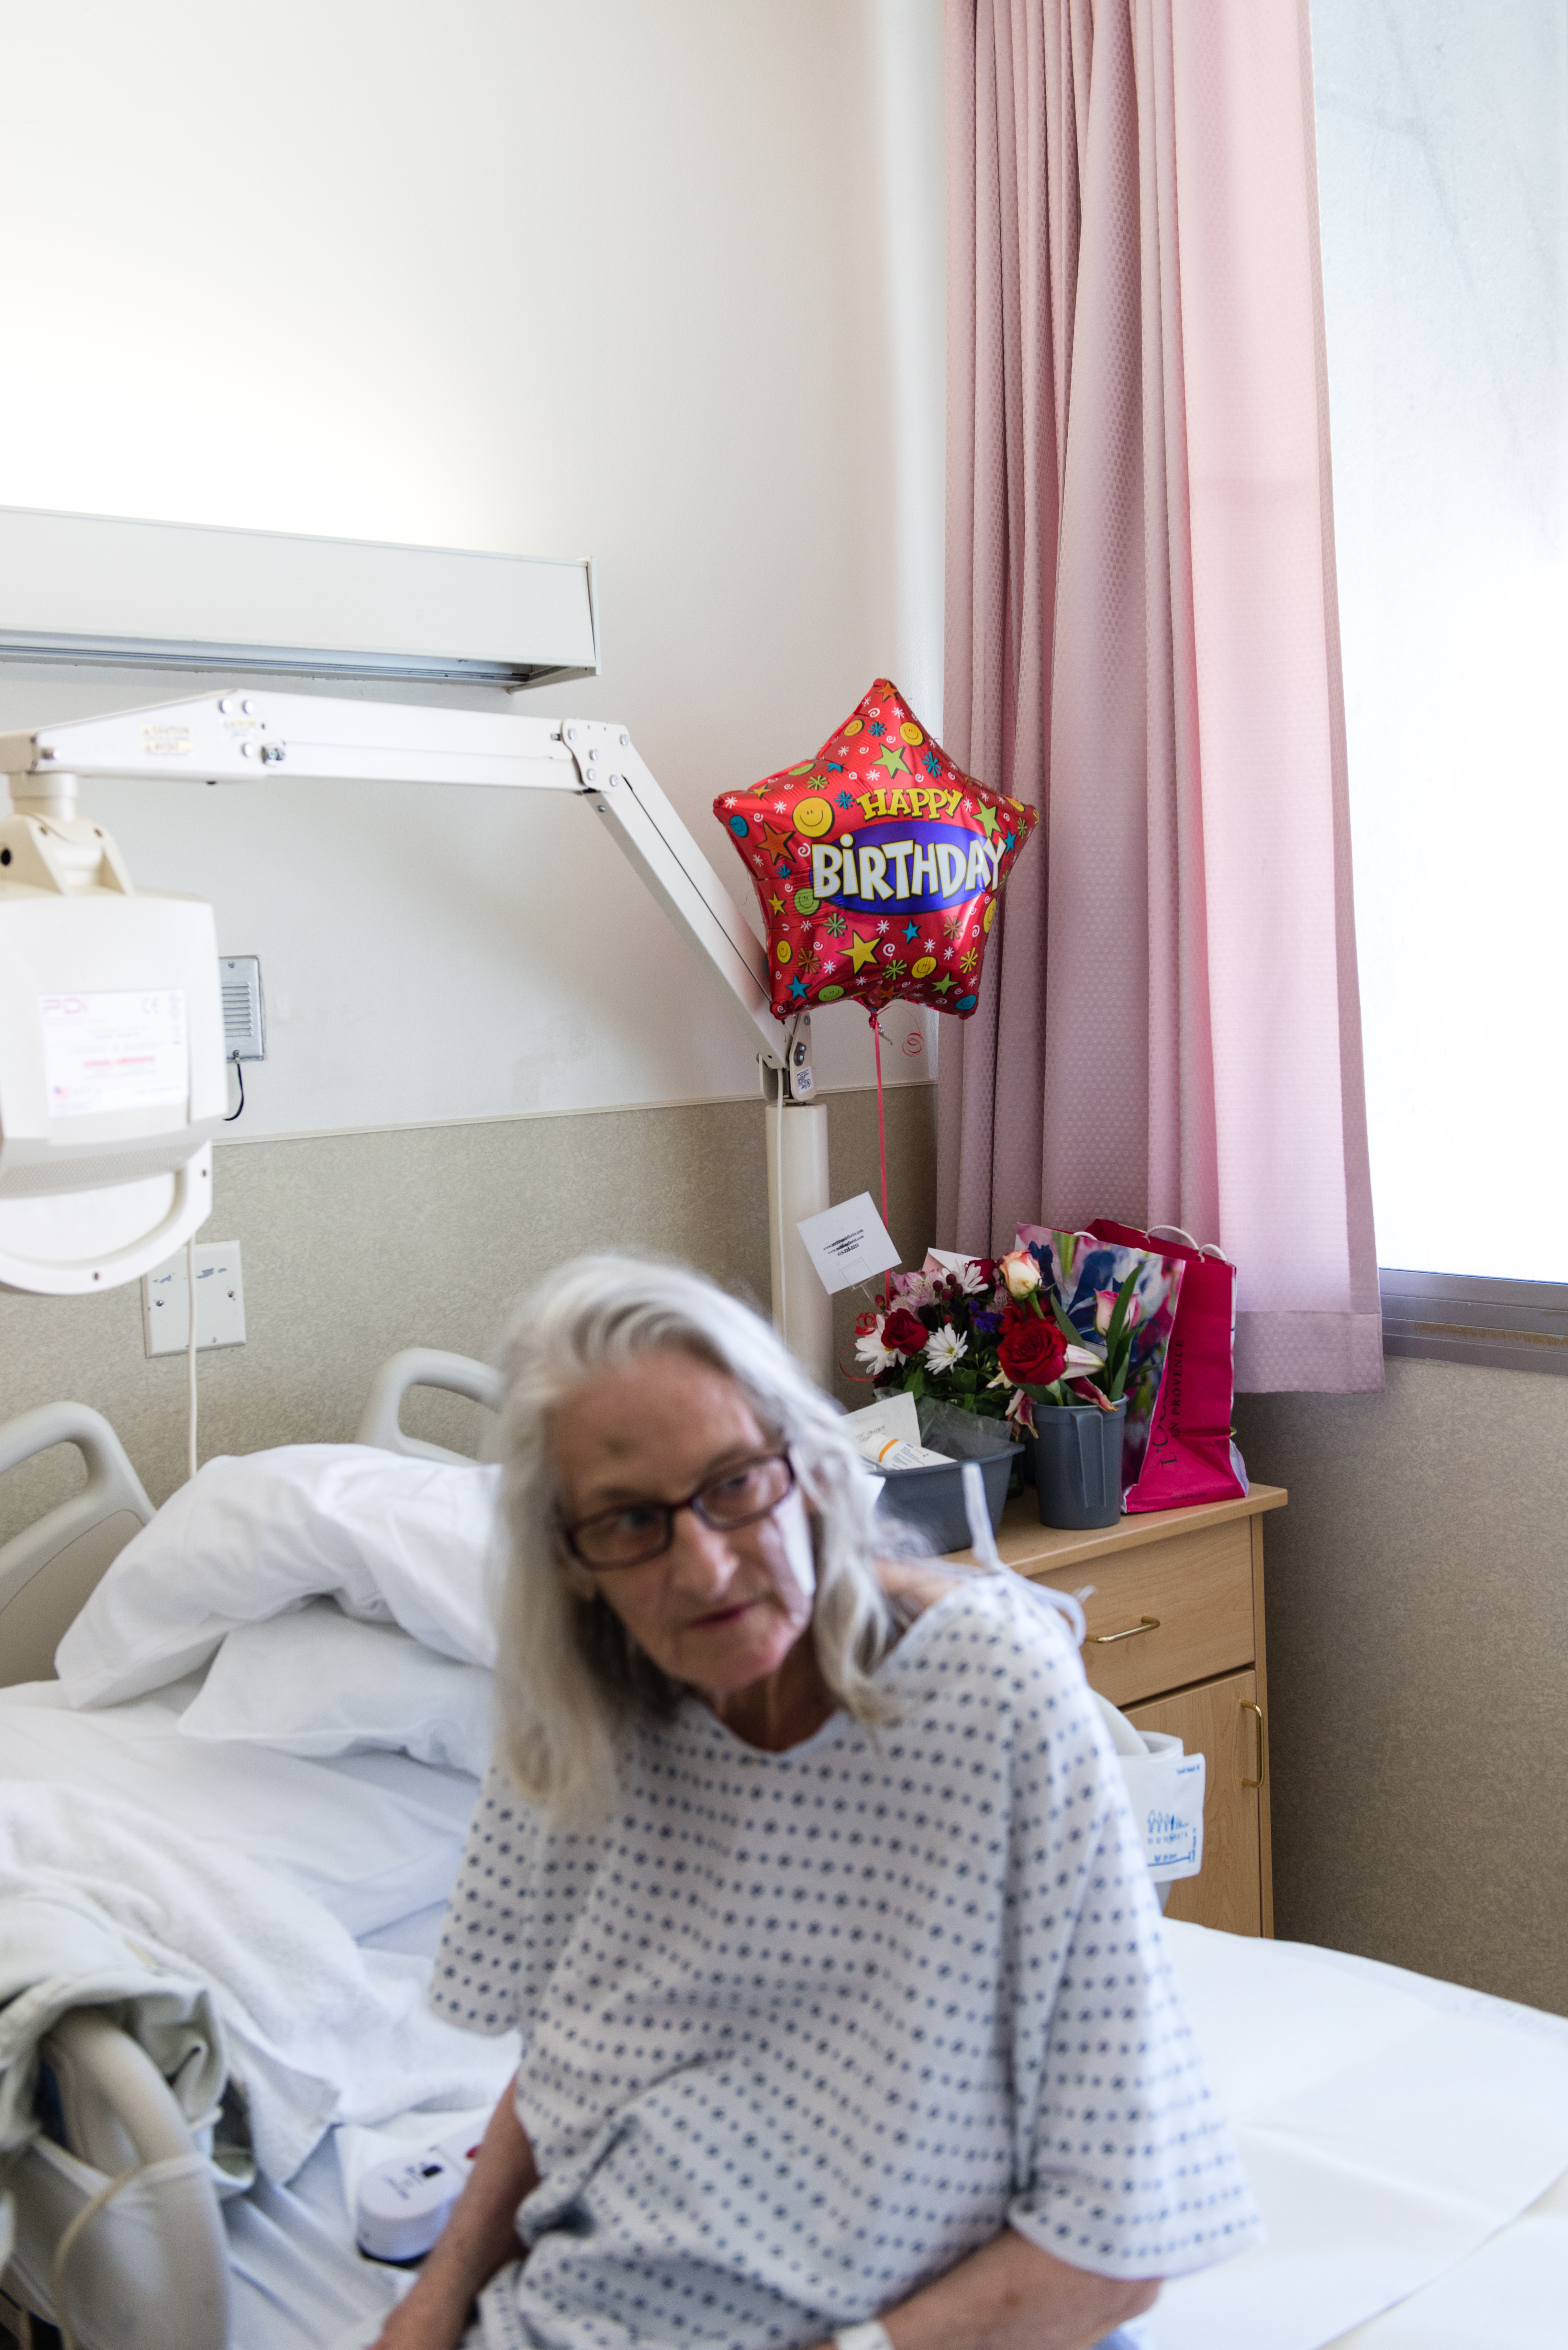 Patient Janet Prochazka celebrated her birthday during her stay at San Francisco General Hospital. Prochazka was admitted to the hospital in March after injuring herself in a fall. (Heidi de Marco/KHN)